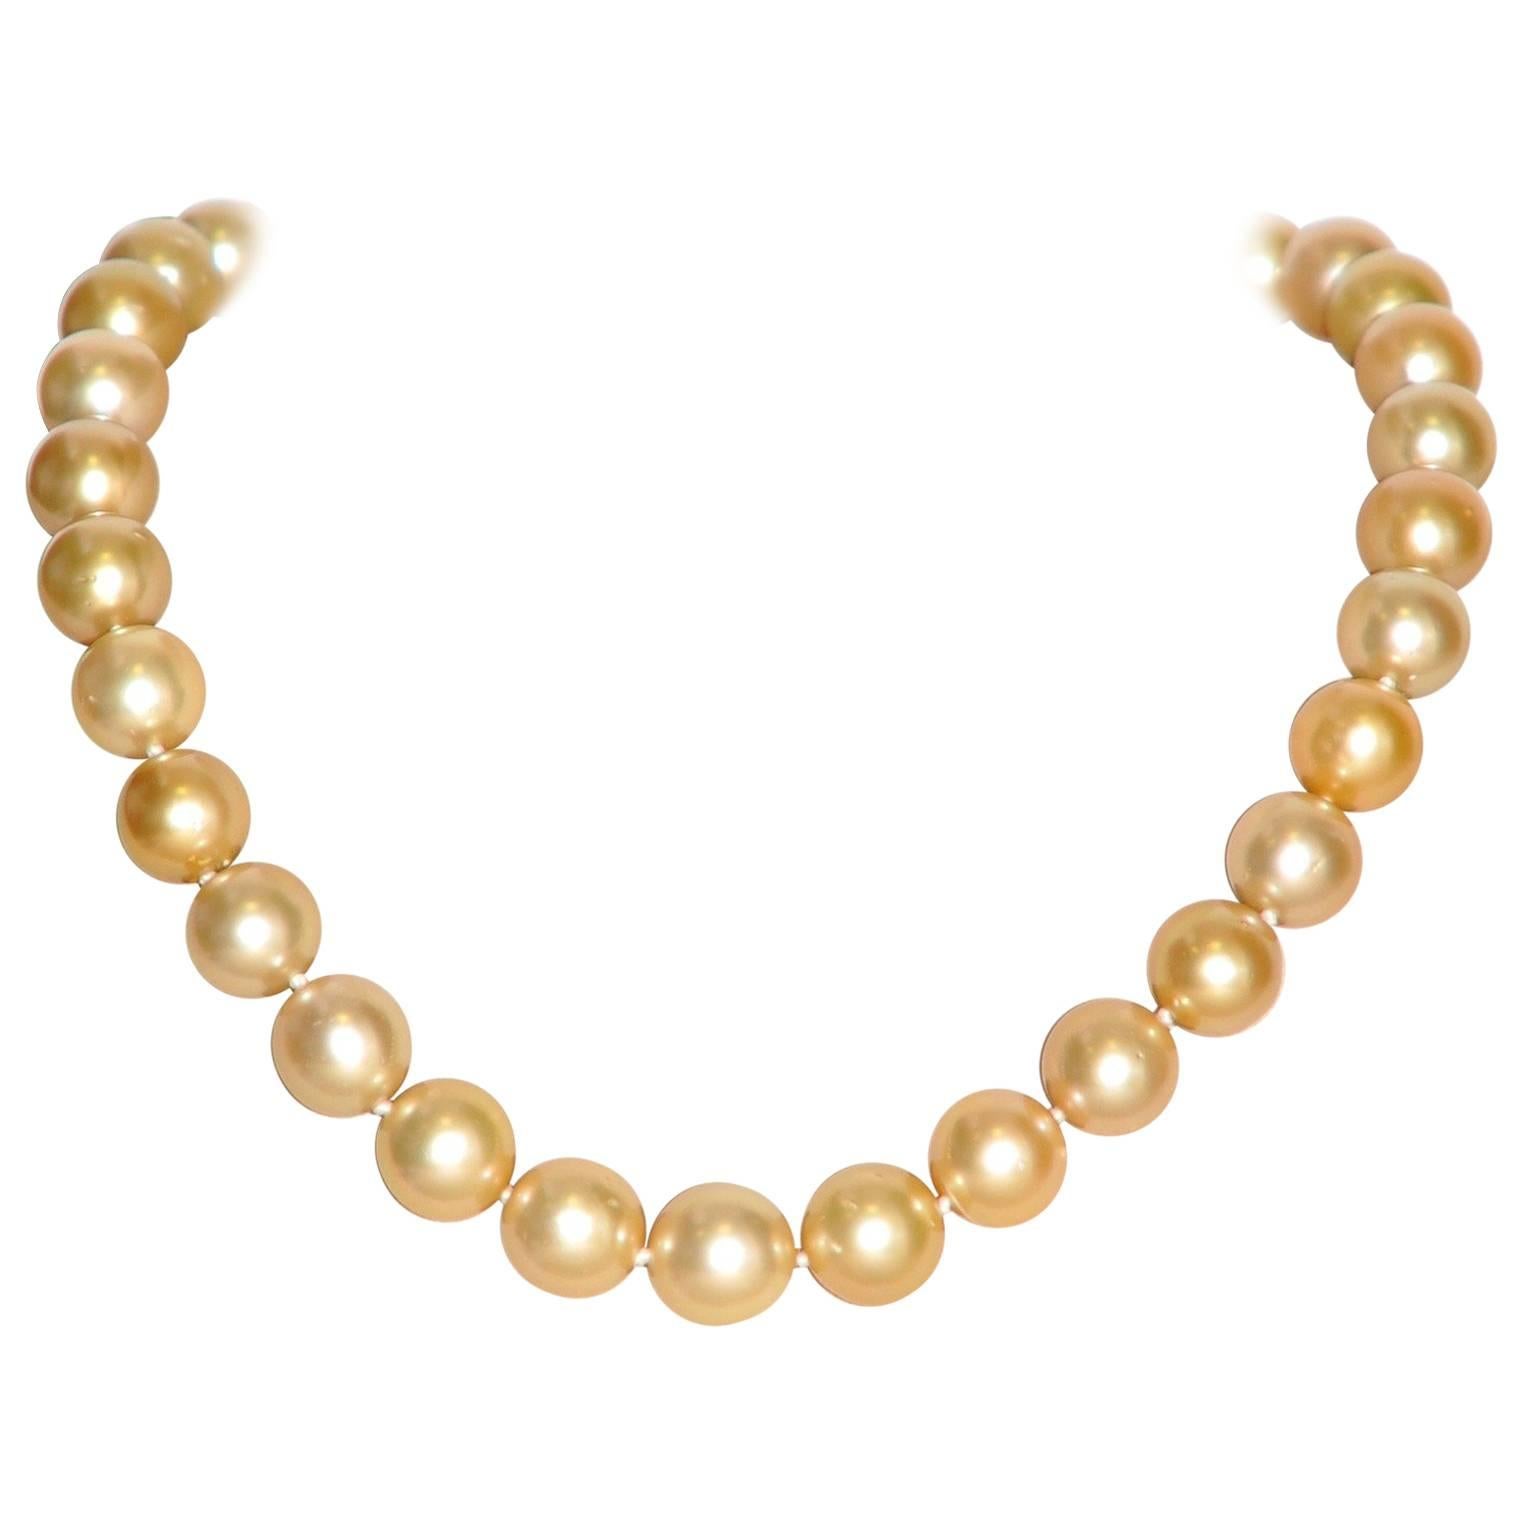 Clasp Beaded Necklace South Sea Golden Pearls Yellow Gold 18 Karat